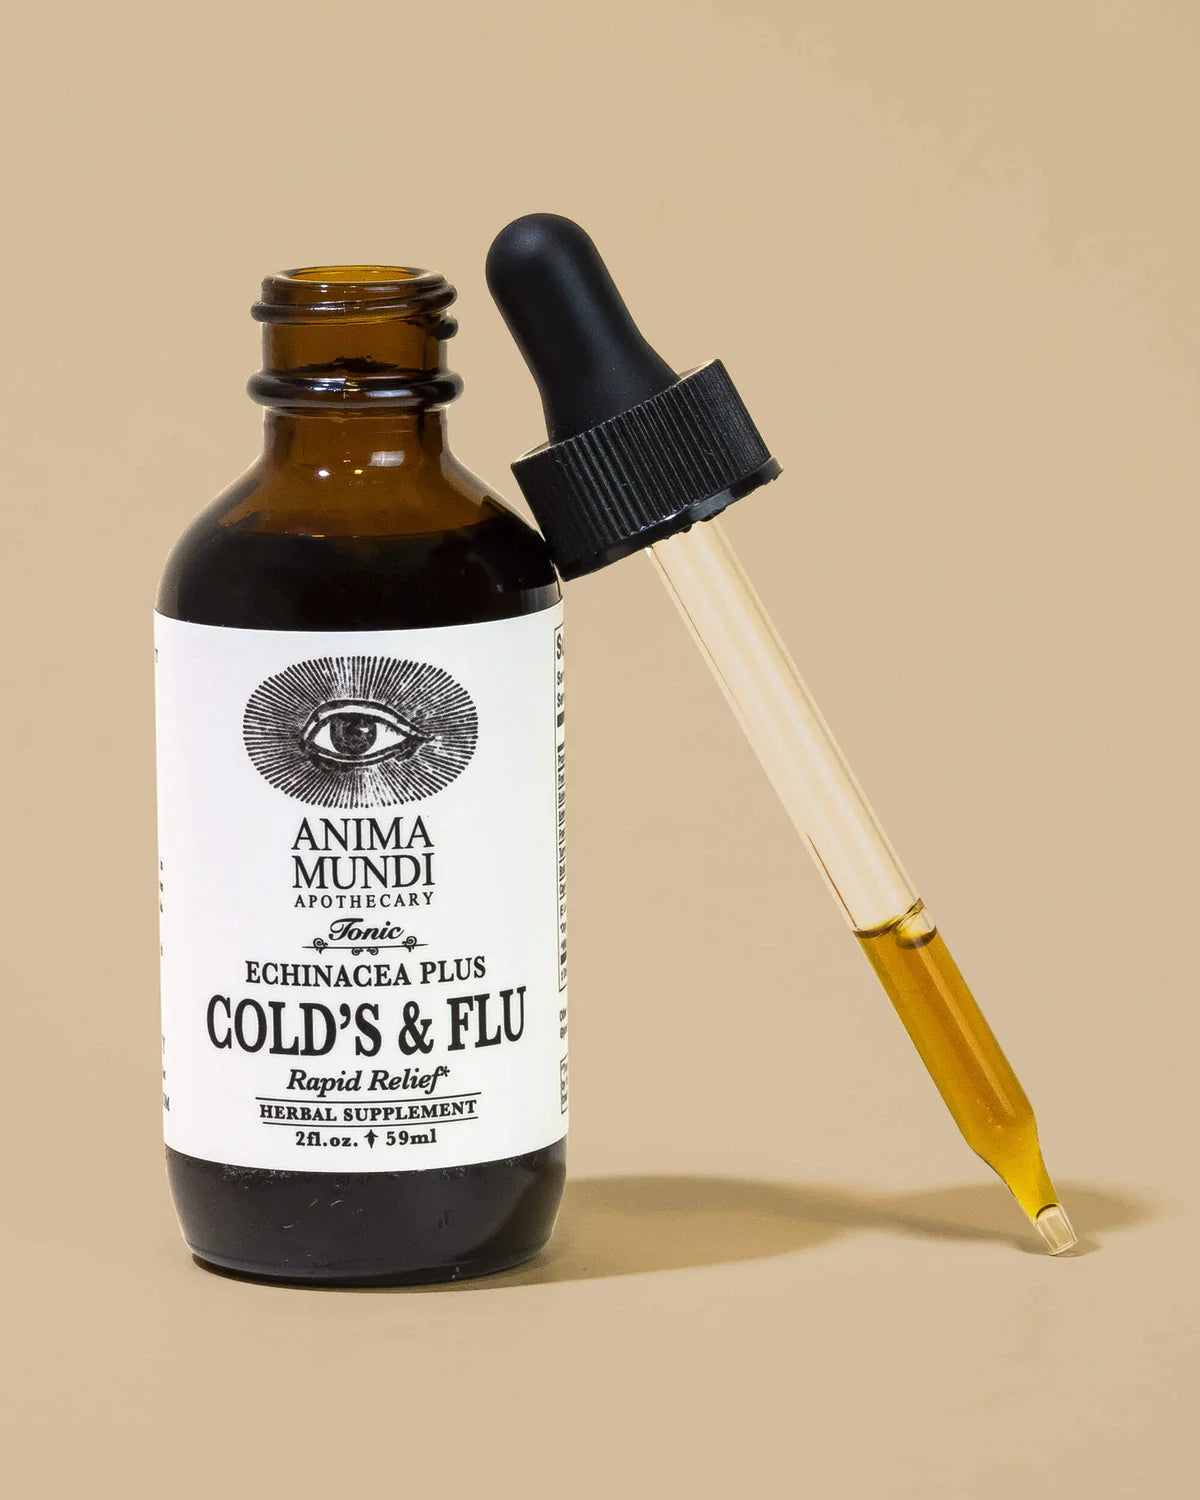 COLD'S COCKTAIL : High Potency Colds & Flu Tonic [Pre-Order]